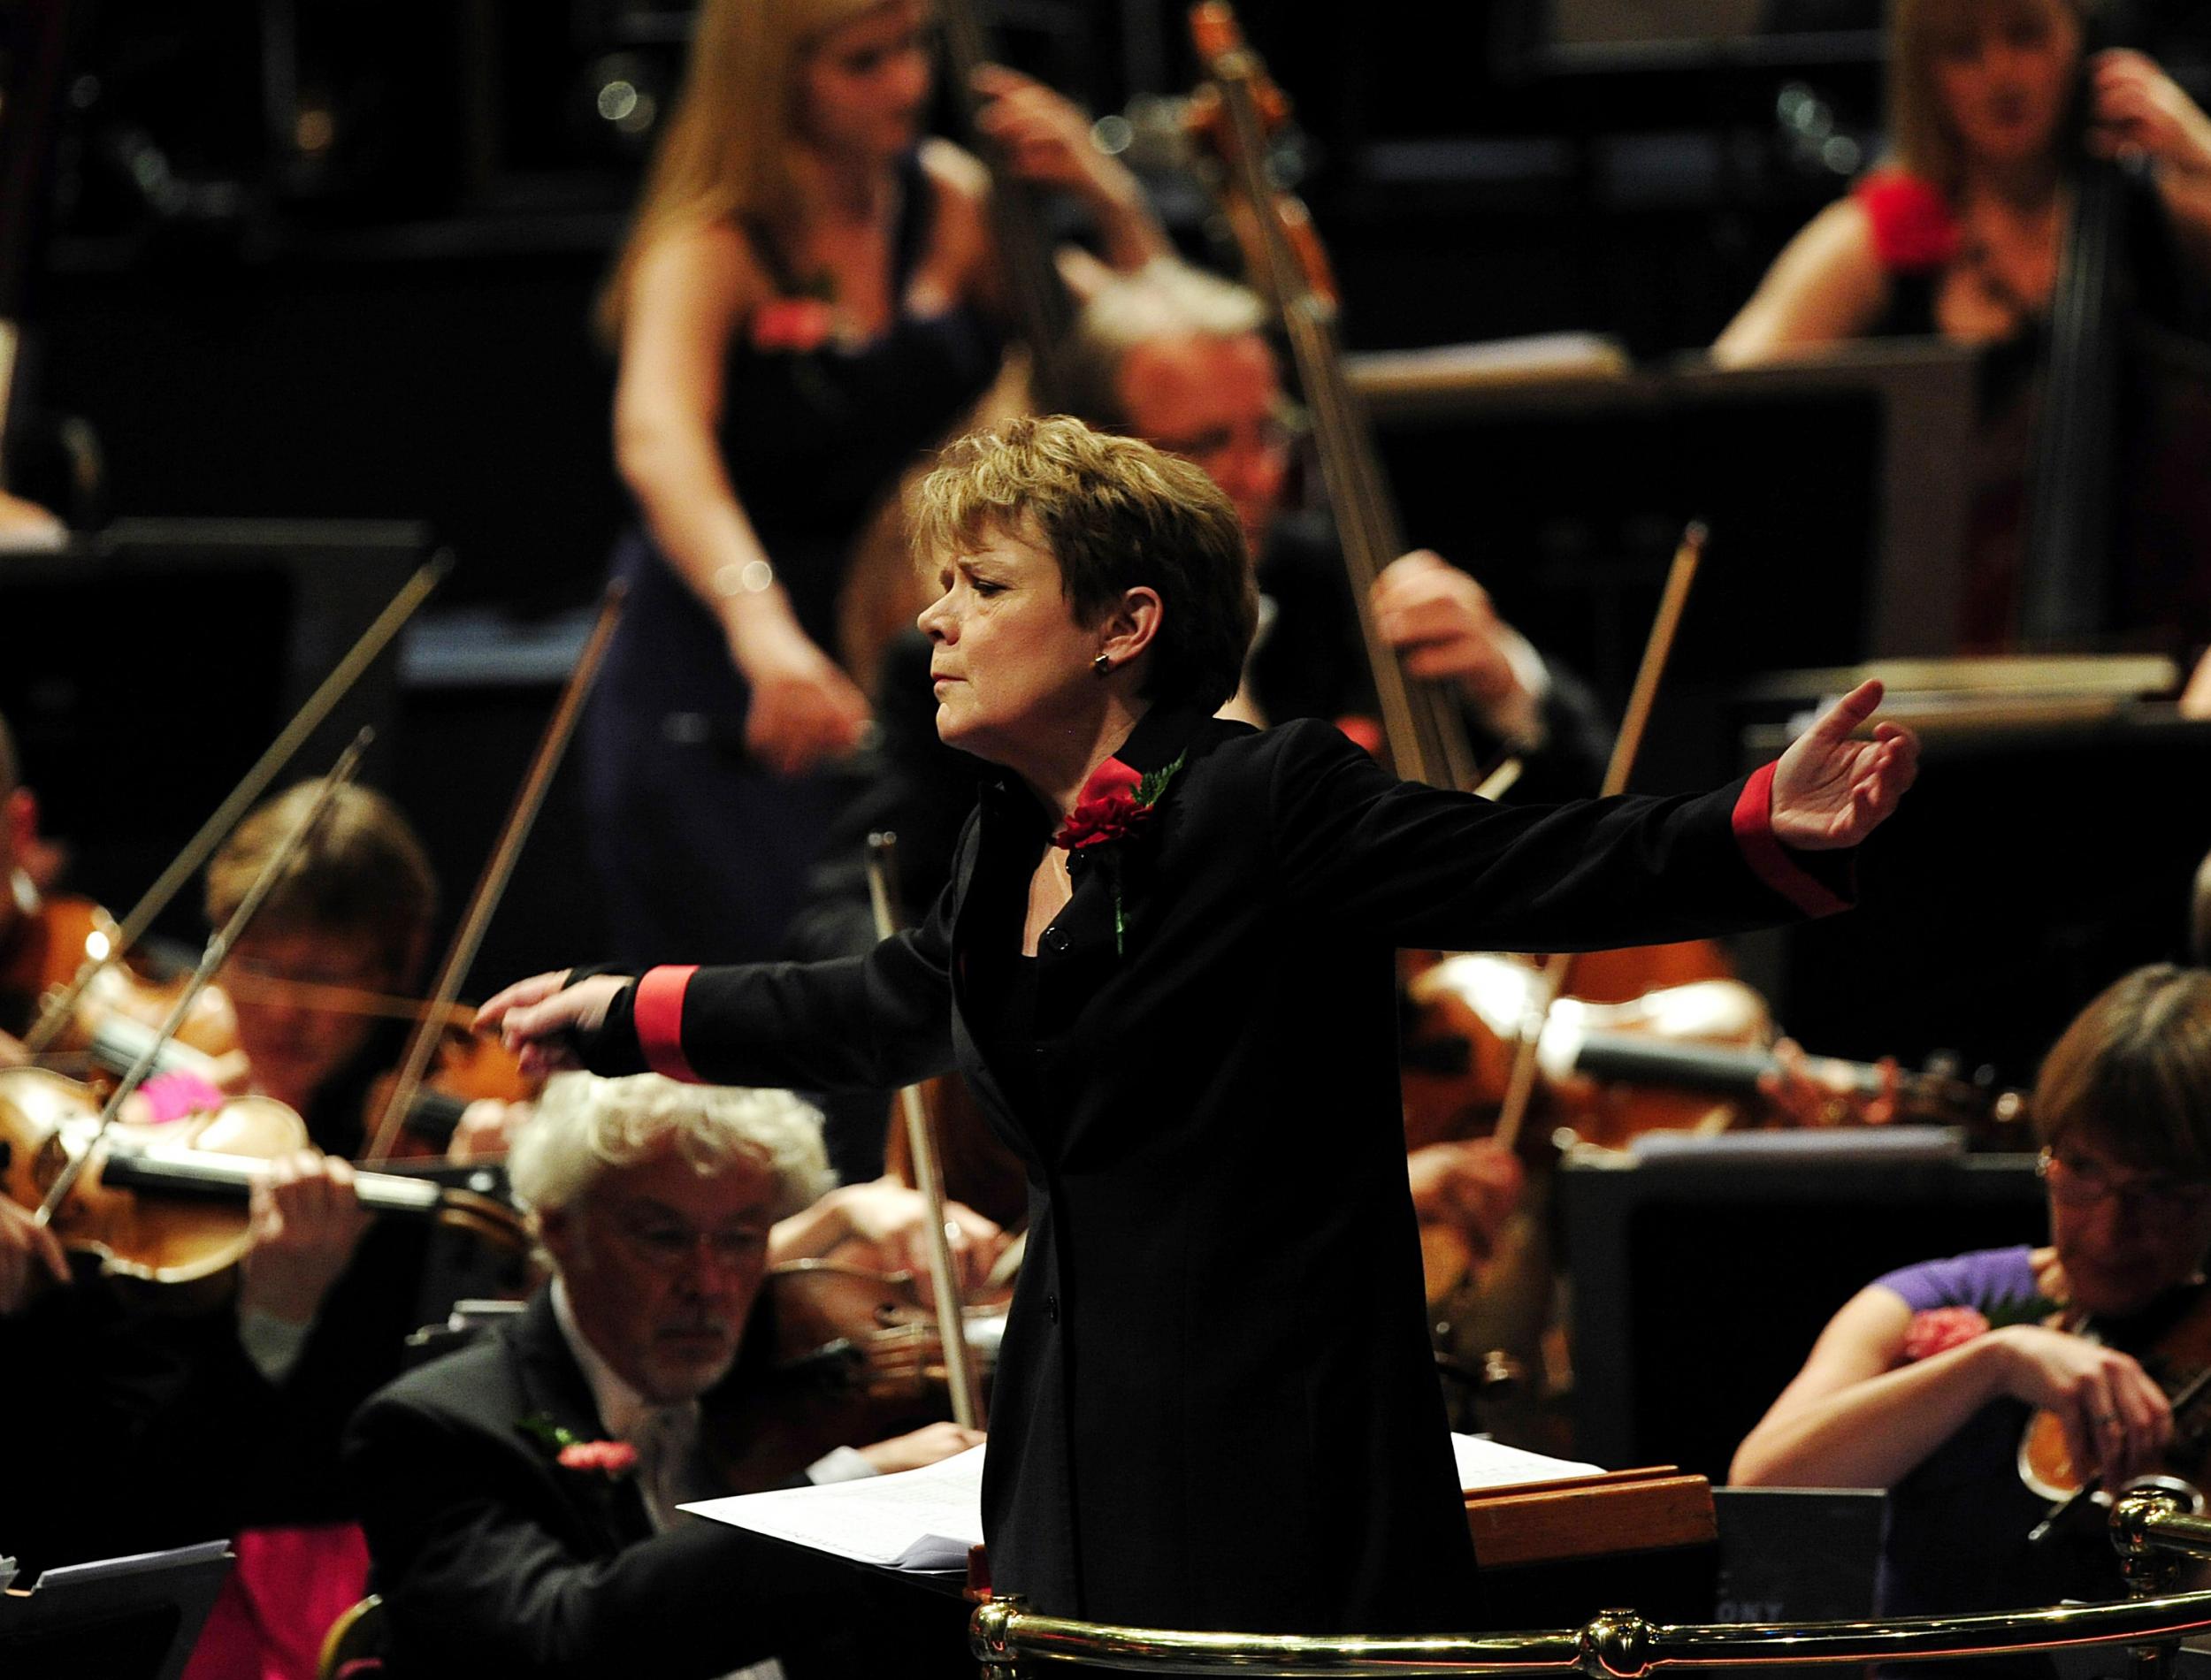 Marin Alsop will be conducting the São Paolo Symphony Orchestra for Prom 51